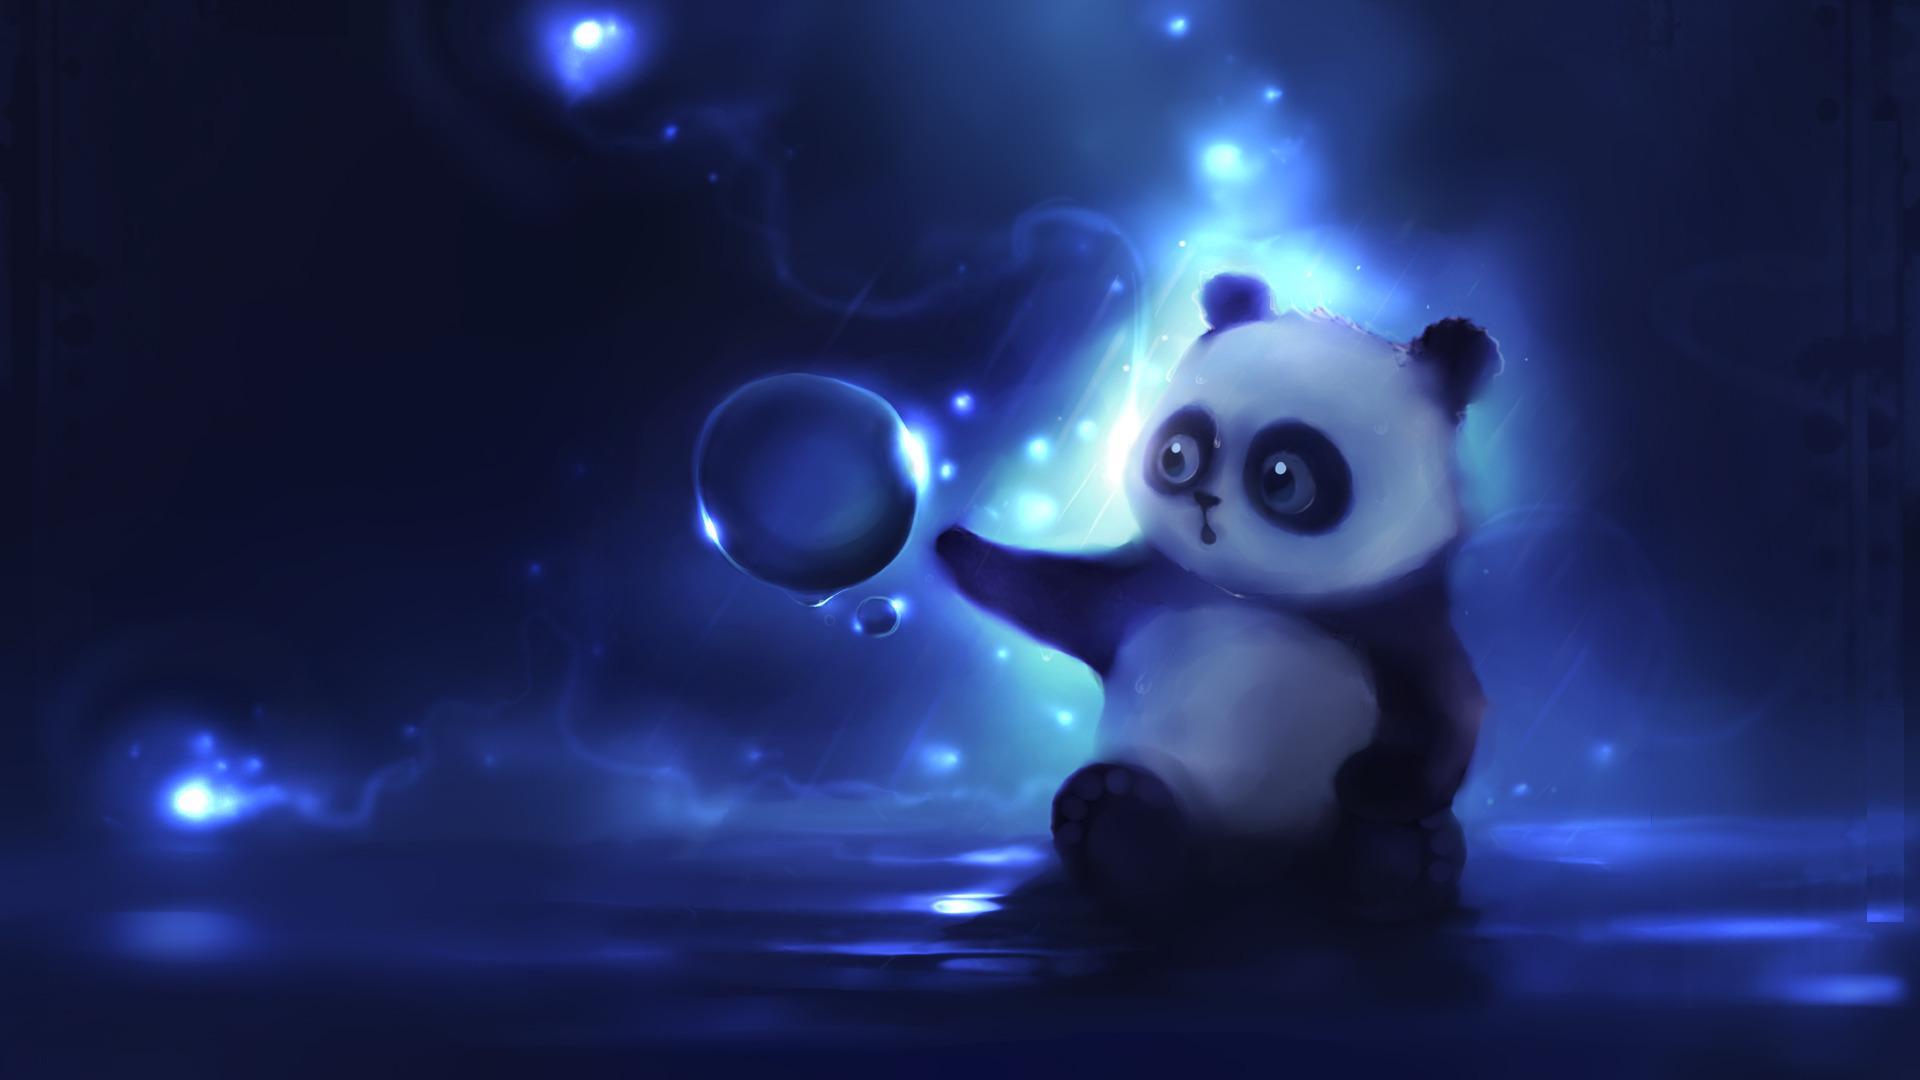 cute animated wallpapers for mobile | Zellox